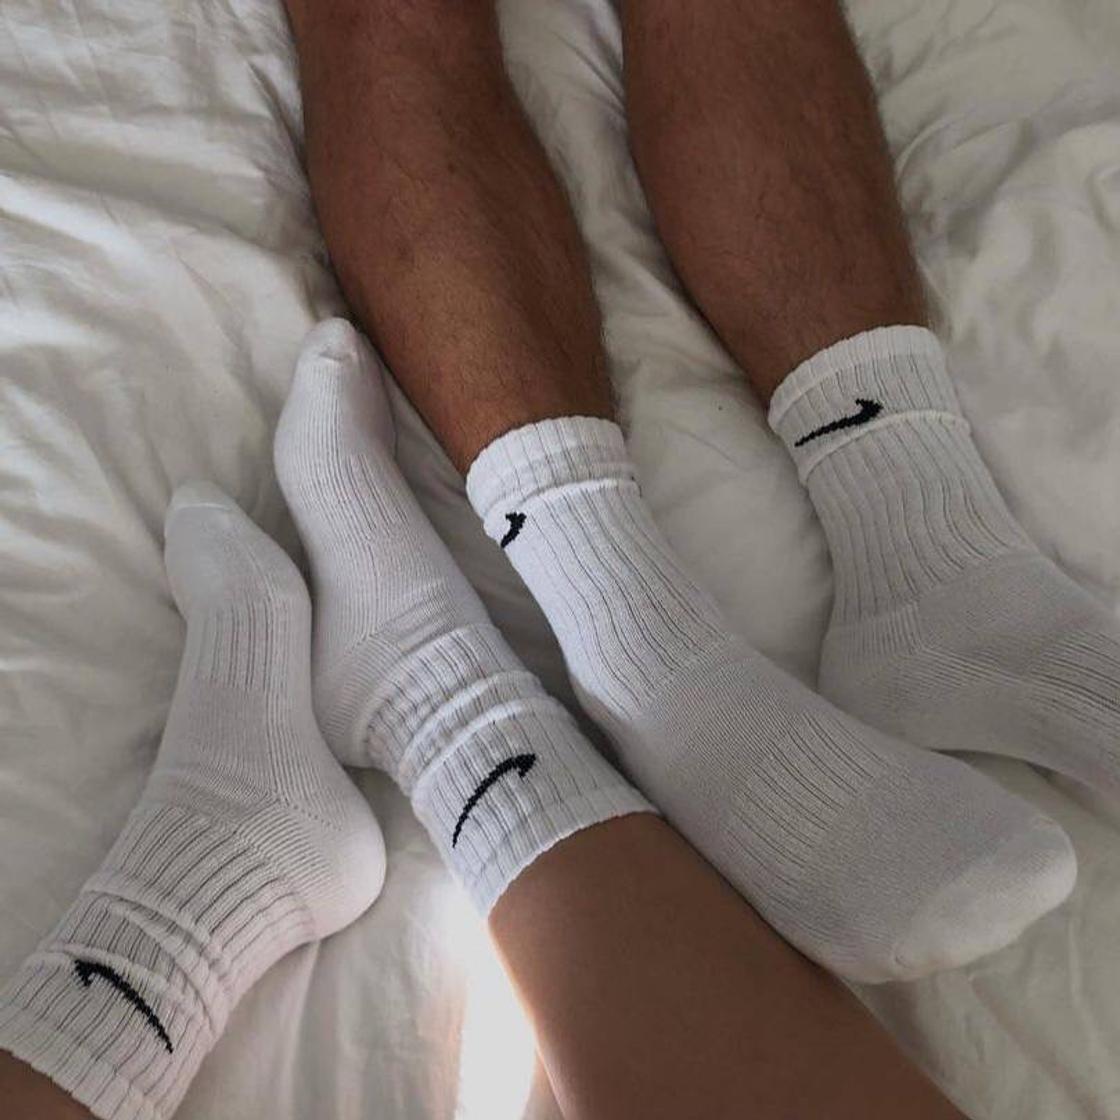 Best cushioned socks for tennis